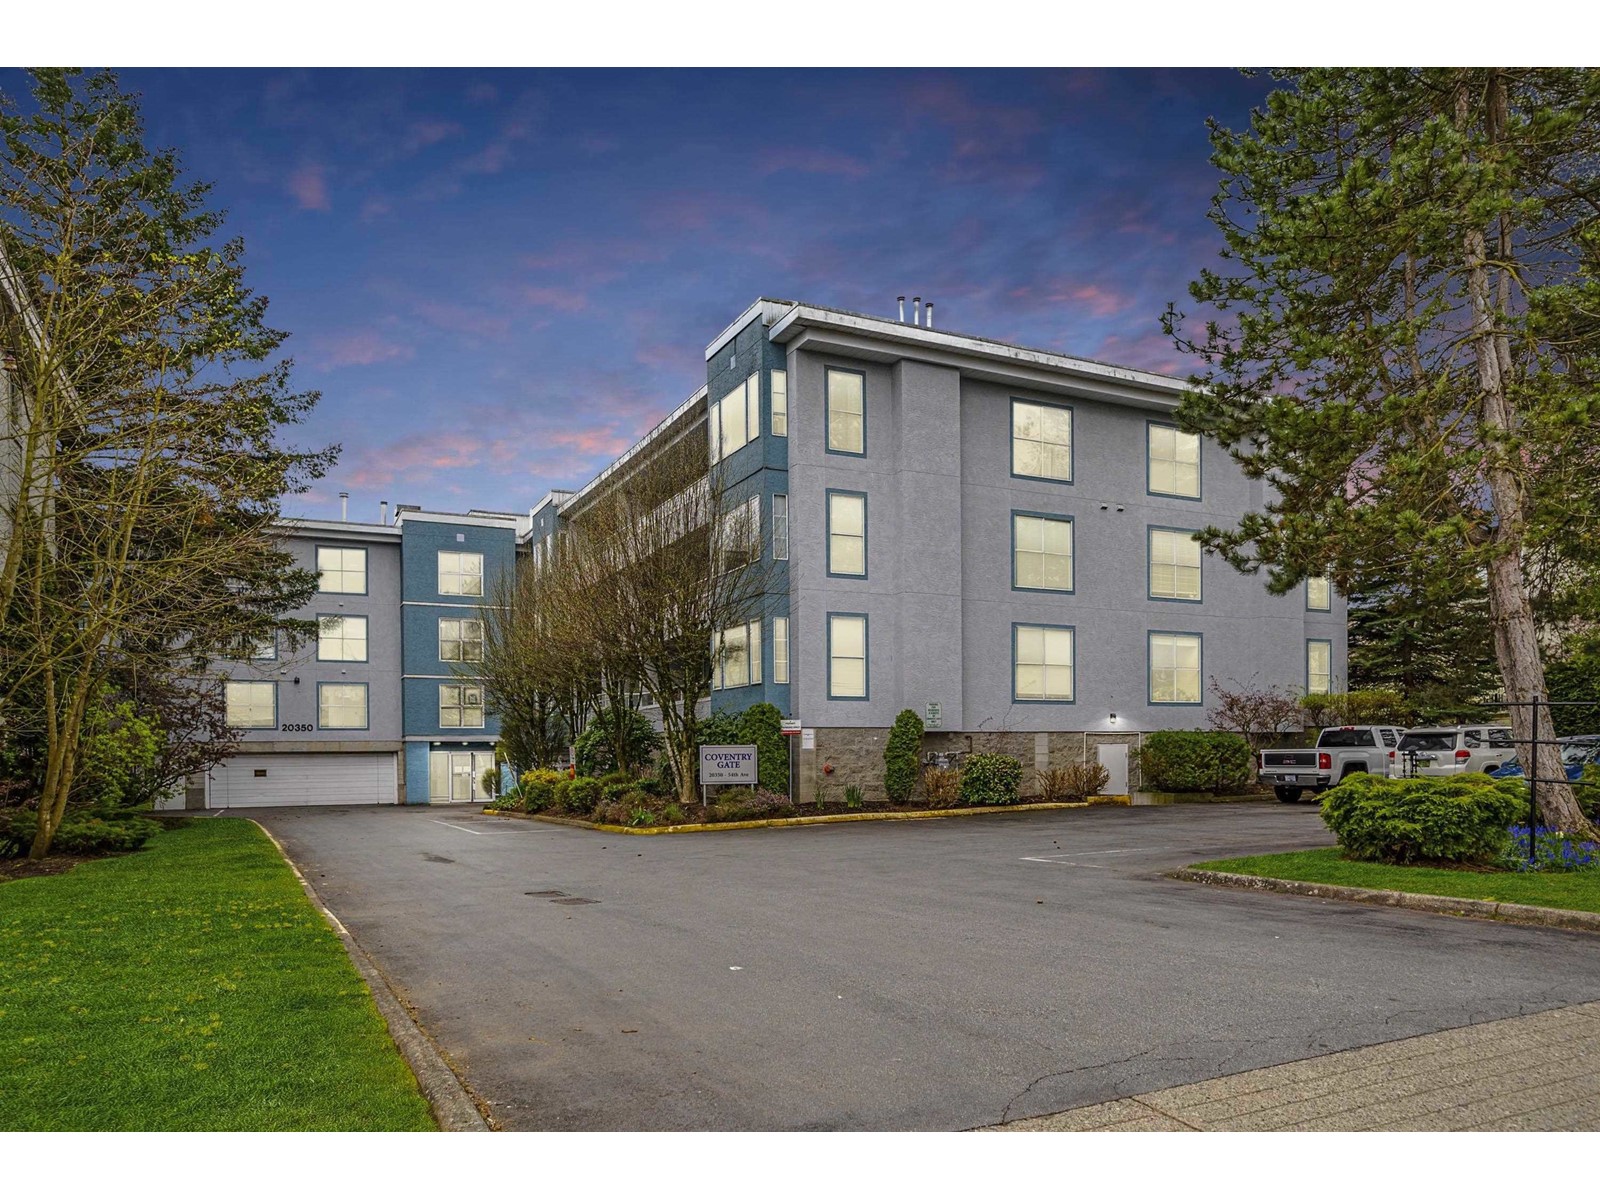 New Stunning 2-Bedroom Apartment in Langley. 20350 54 AVENUE #102